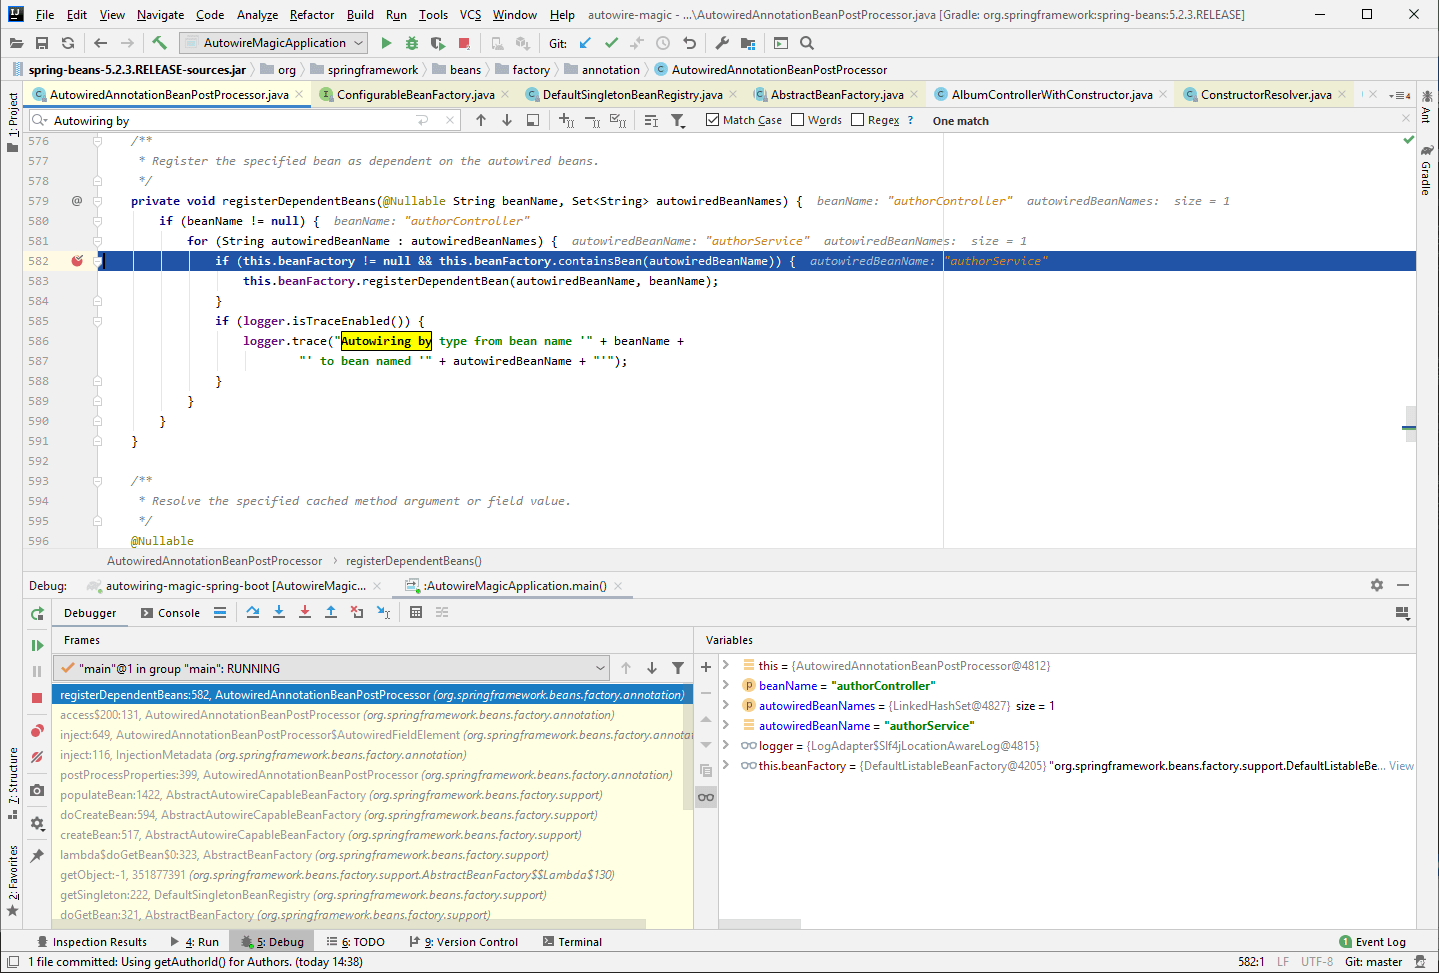 Debugging Spring in IntelliJ Idea to see how the dependency is registered